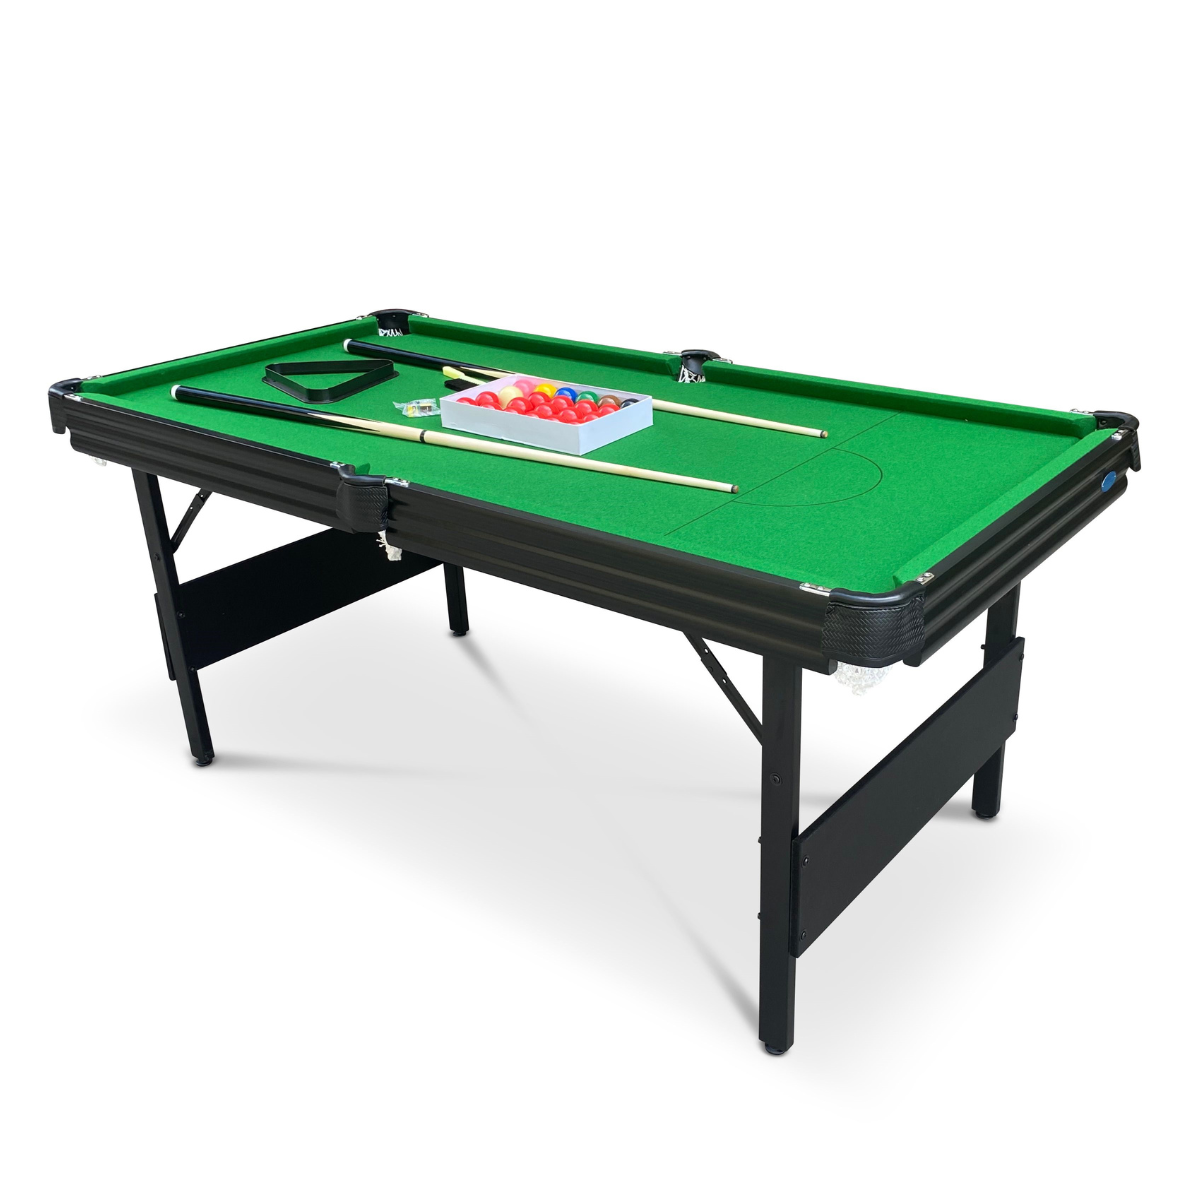 The Crucible 6ft Snooker Table